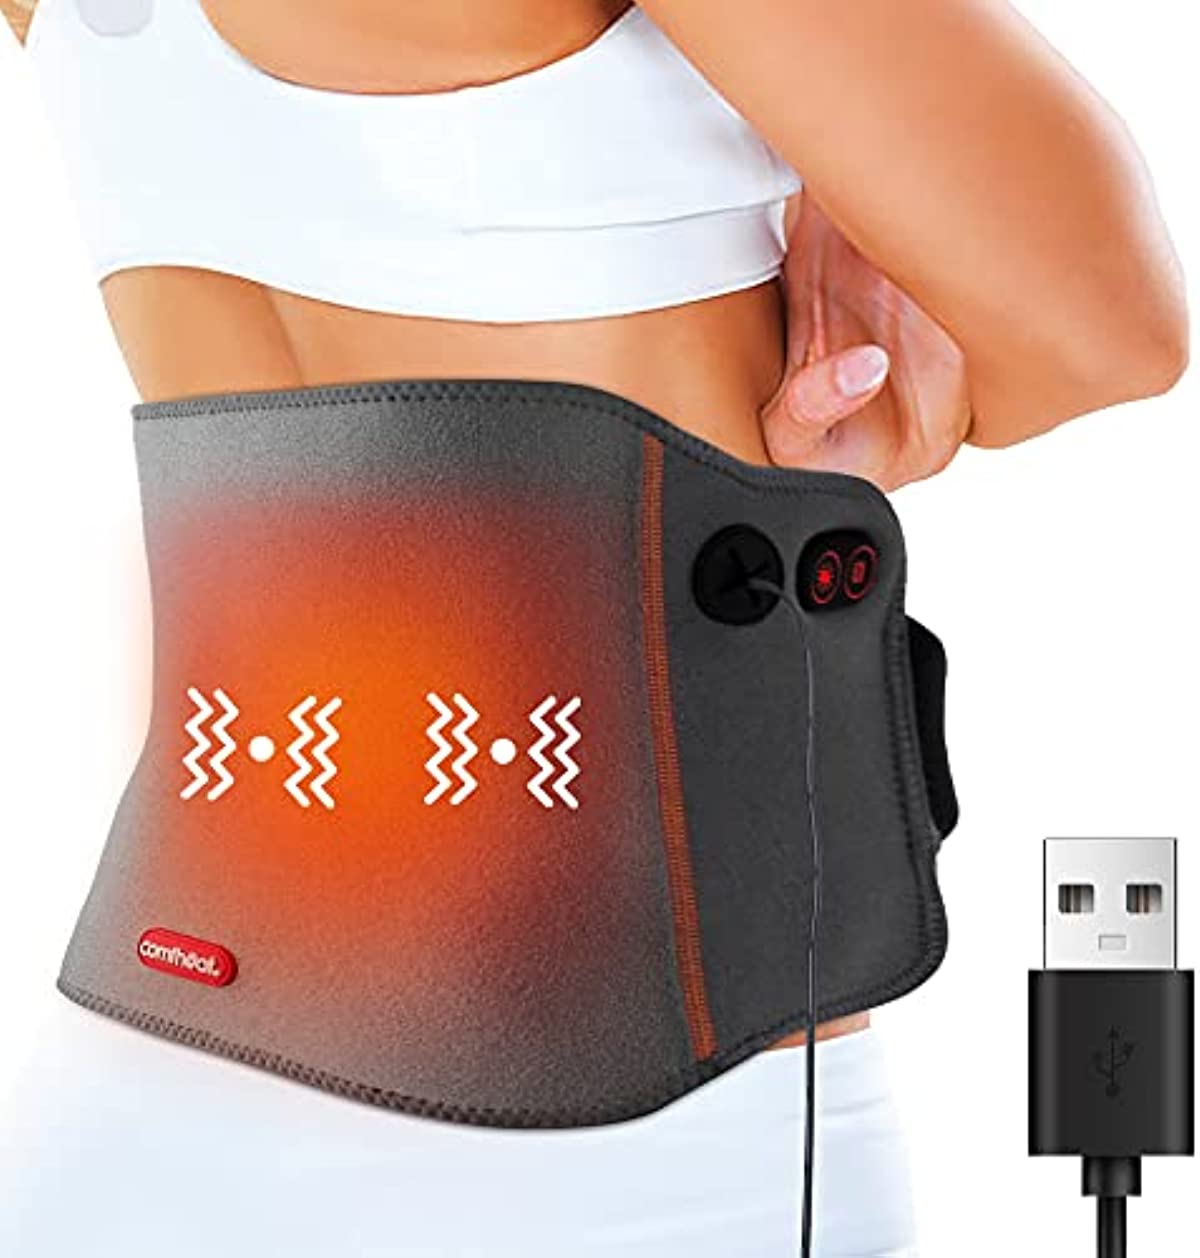 Comfheat USB Back Heating Pad with Massager, Heated Waist Massage Belt for Low Back Pain Relief Lumbar Spine, 3 Heat & Massage Levels, Auto Shut Off, Warm Therapy for Cramps, Abdominal(NO Power Bank)